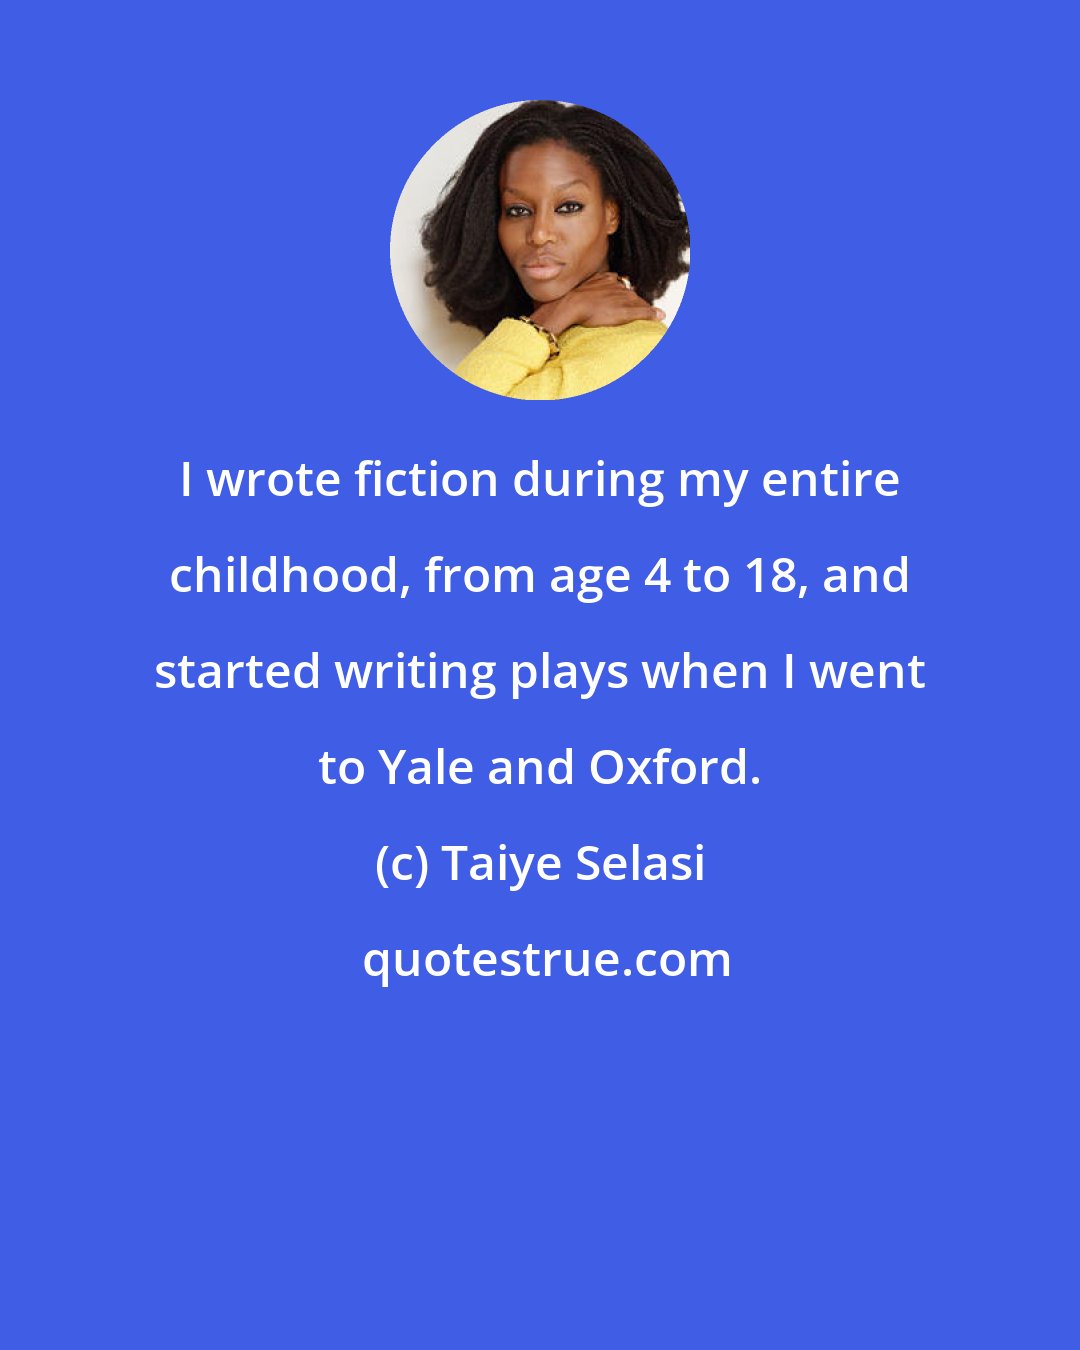 Taiye Selasi: I wrote fiction during my entire childhood, from age 4 to 18, and started writing plays when I went to Yale and Oxford.